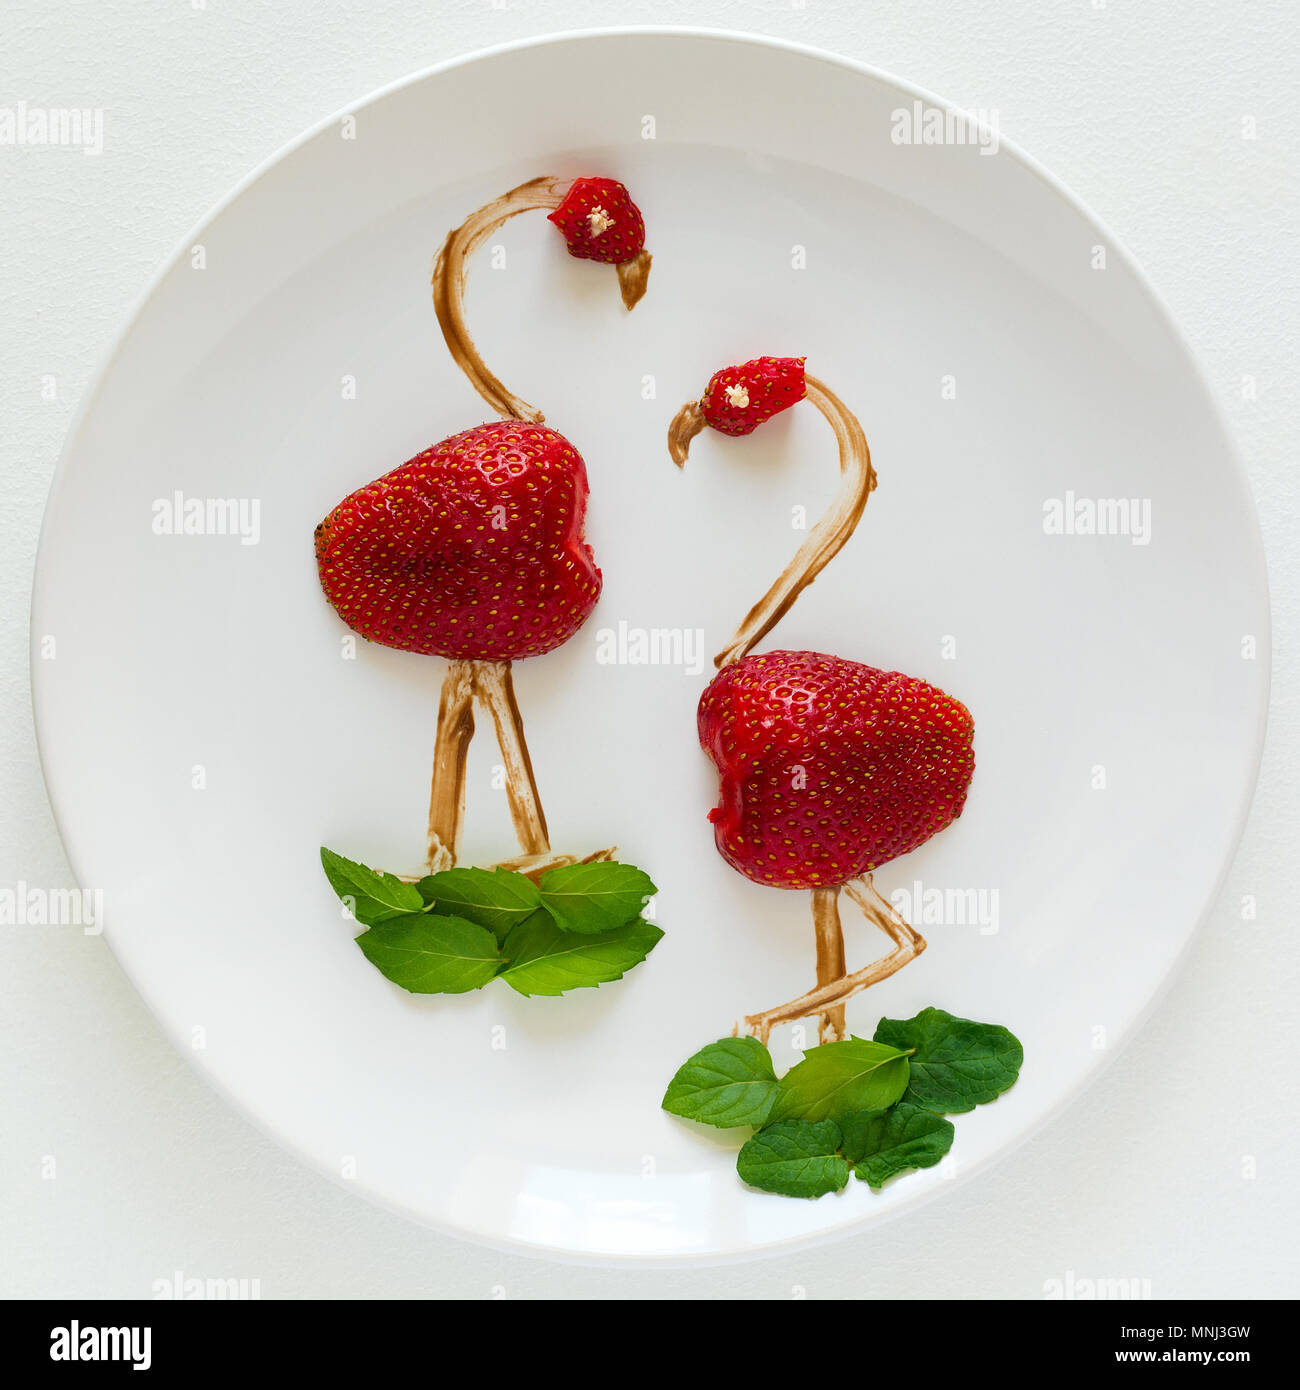 Food art creative concept. Flamingos on white plate. Strawberry, chocolate and mint composition. Top view. Stock Photo